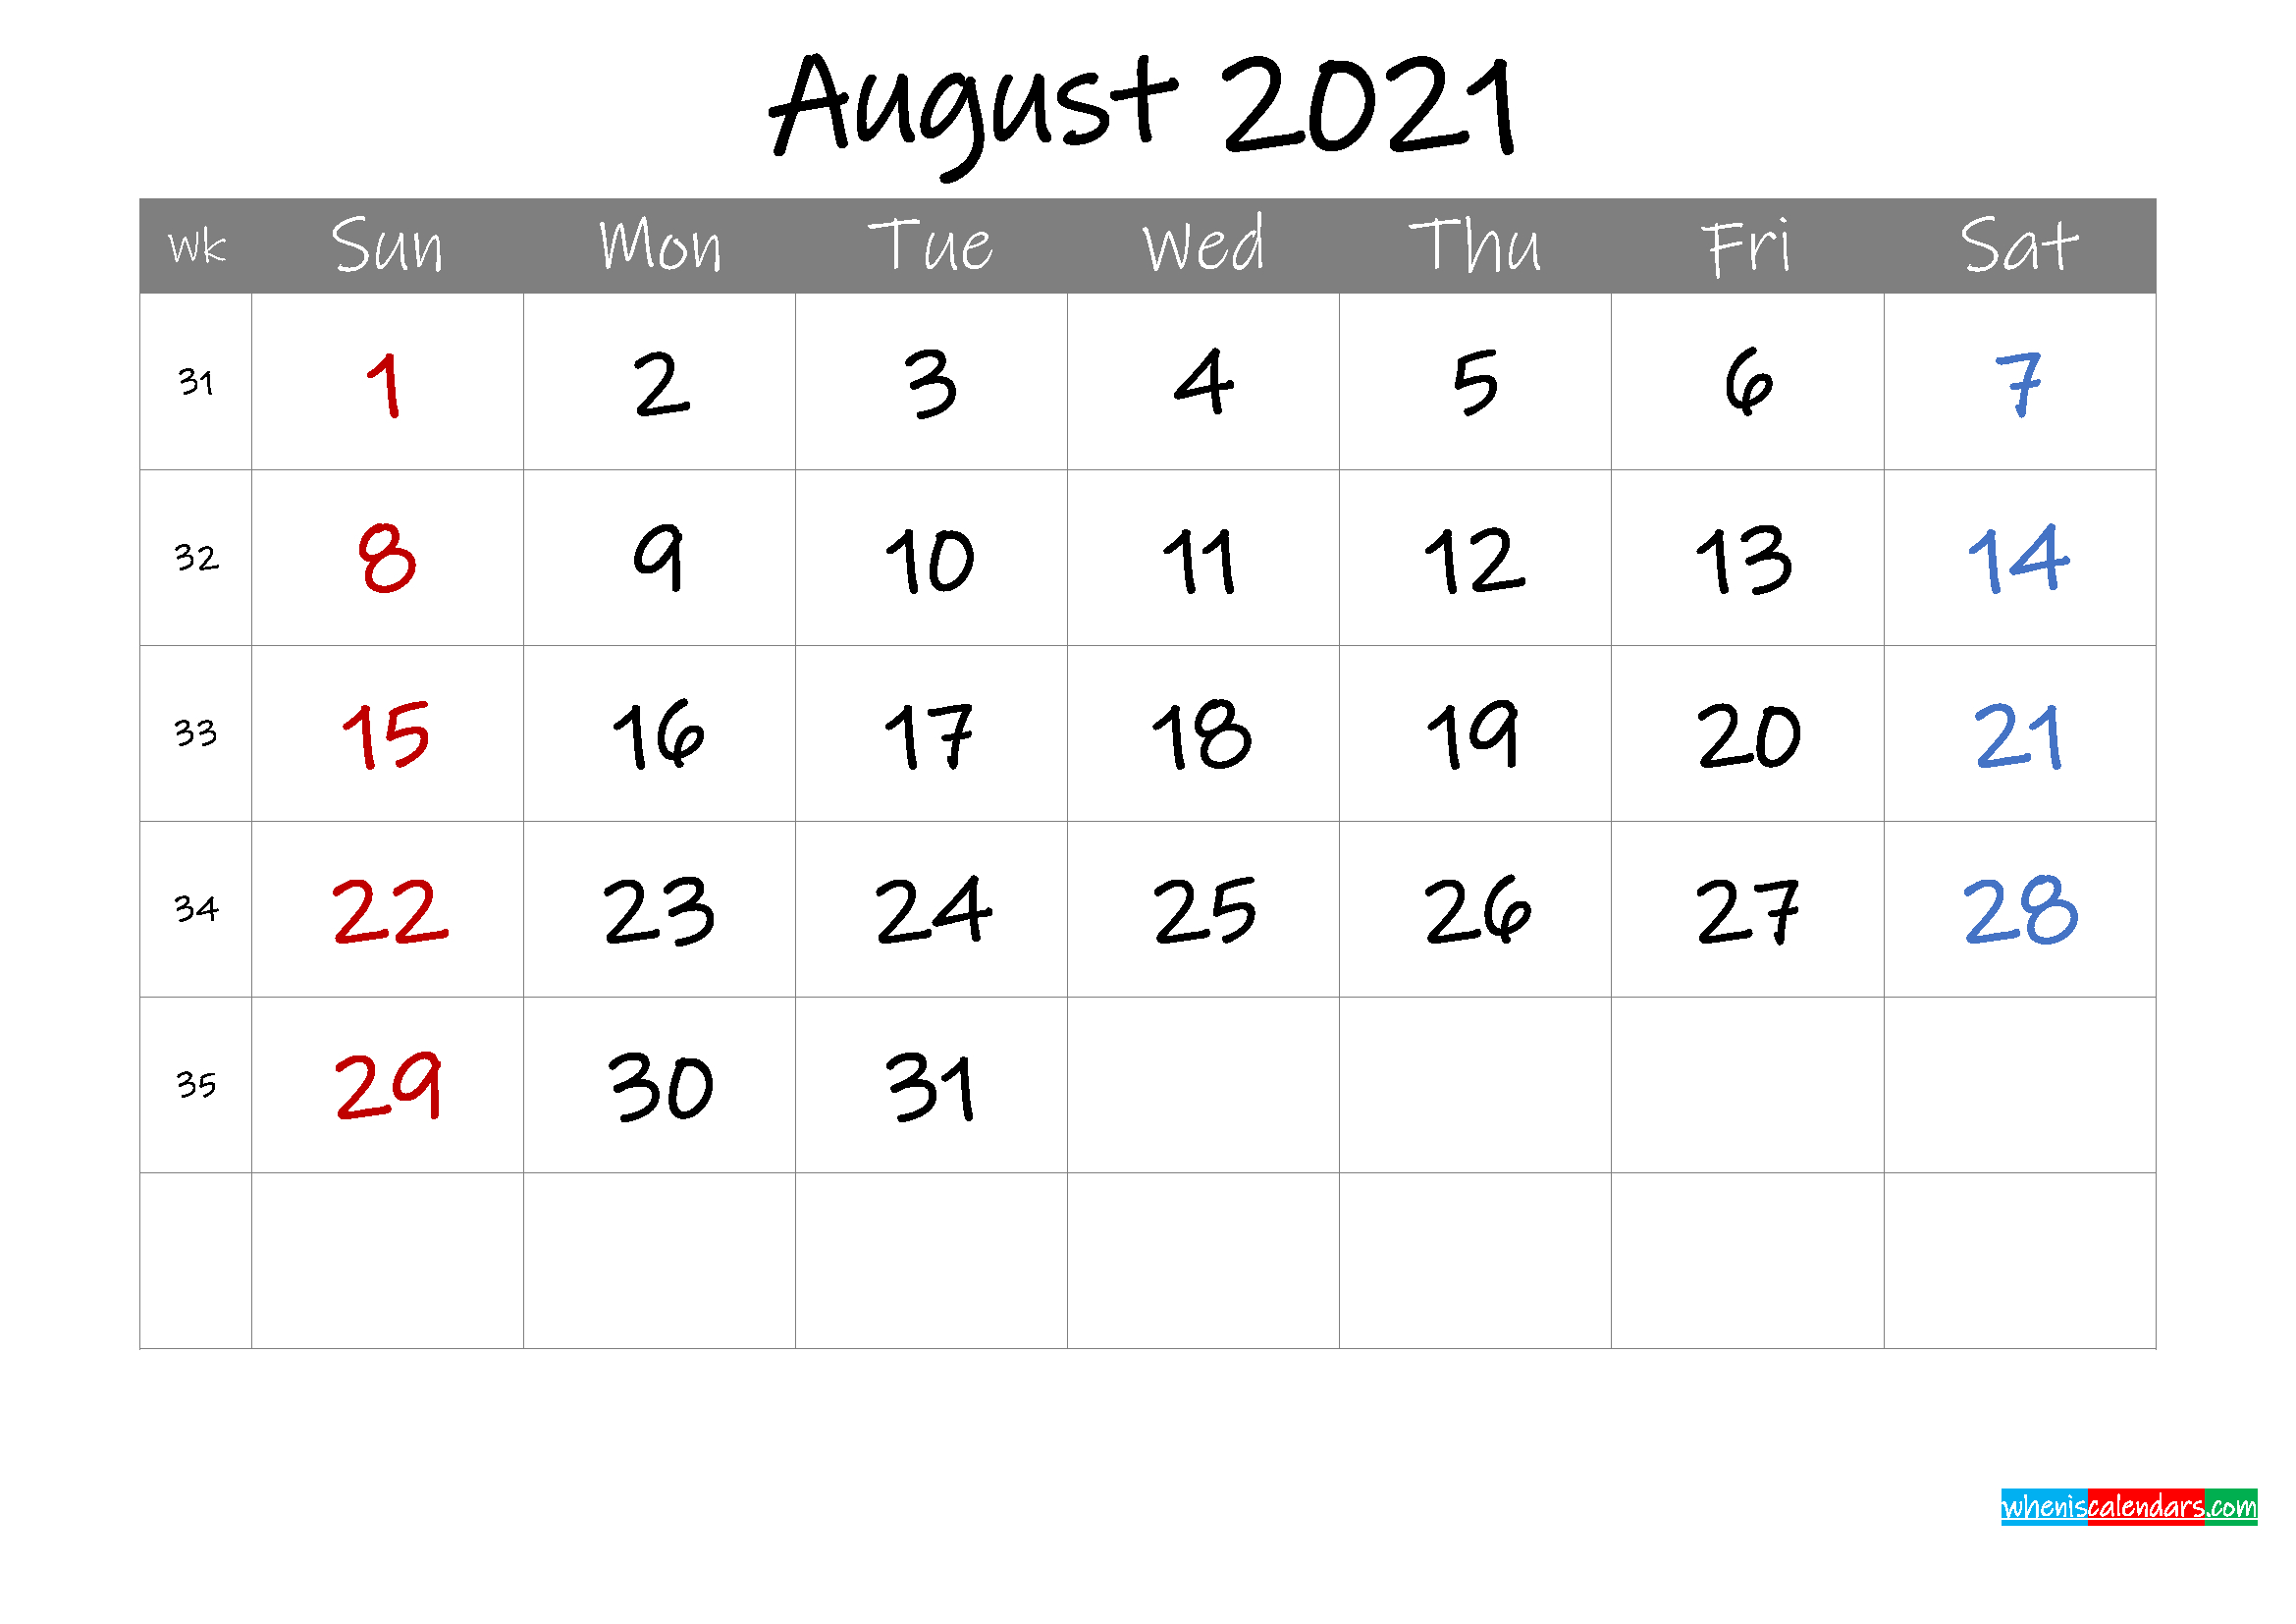 Editable August 2021 Calendar With Holidays - Template Ink21M8